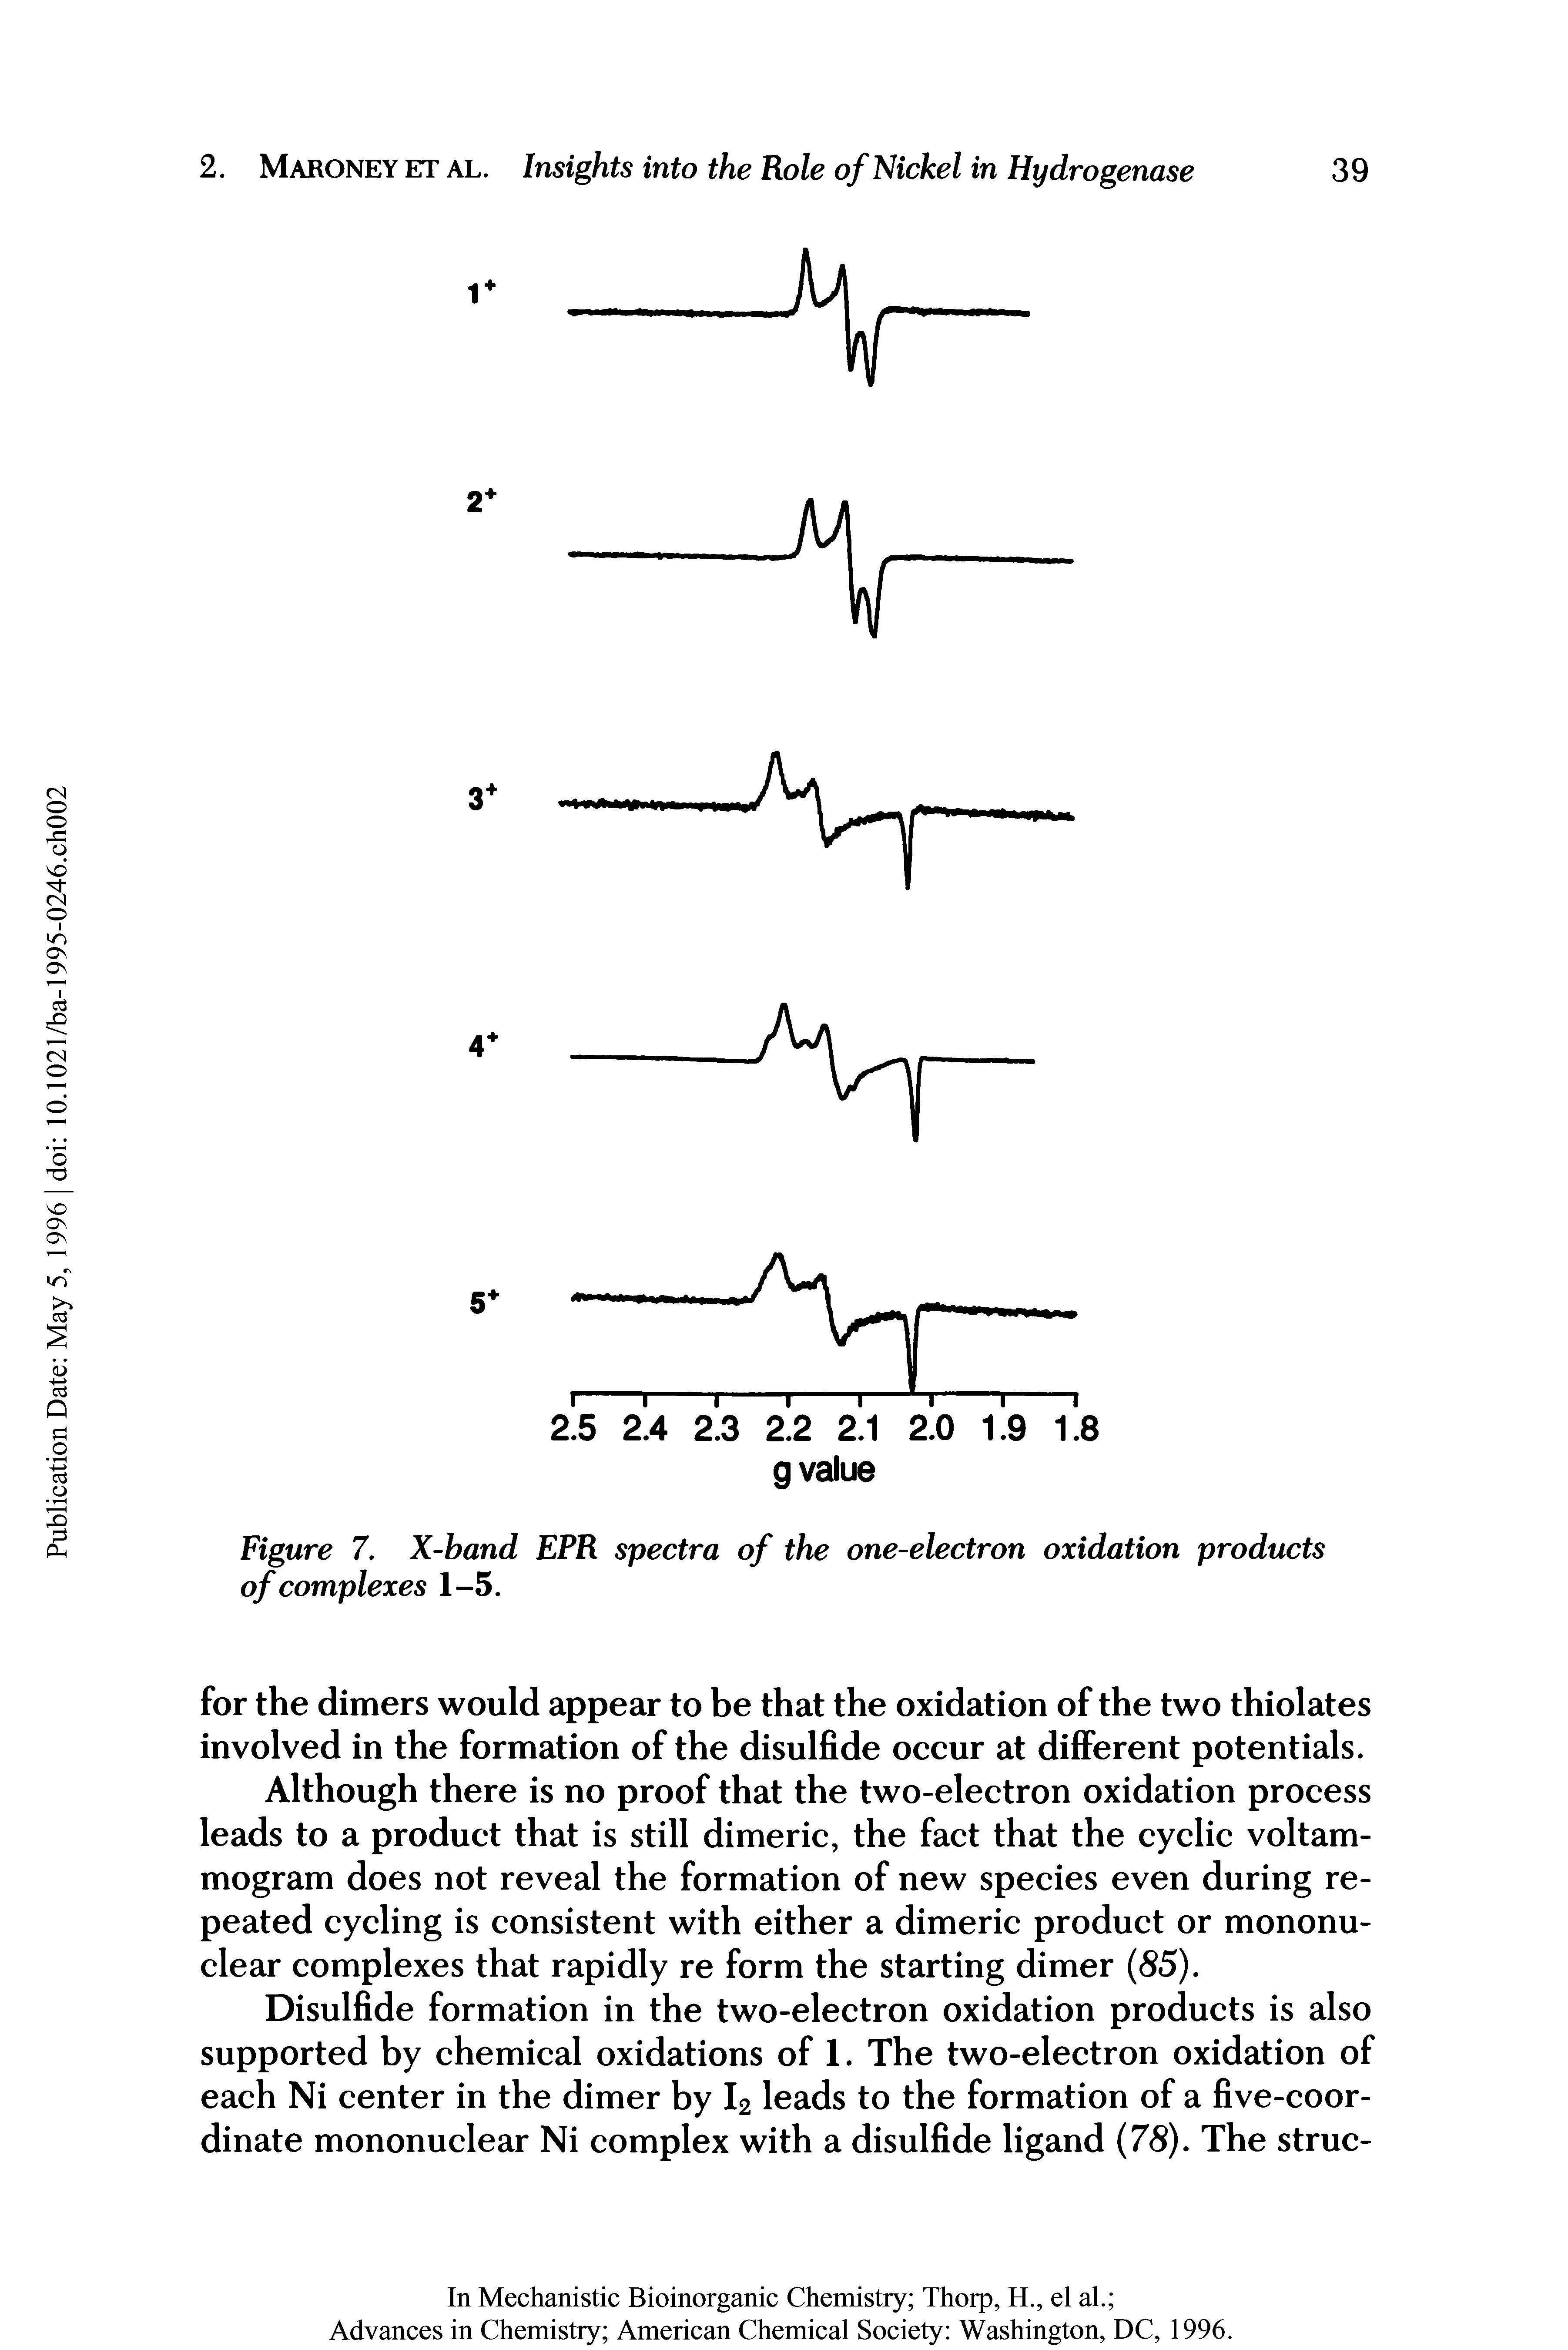 Figure 7. X-band EPR spectra of the one-electron oxidation products of complexes 1-5.